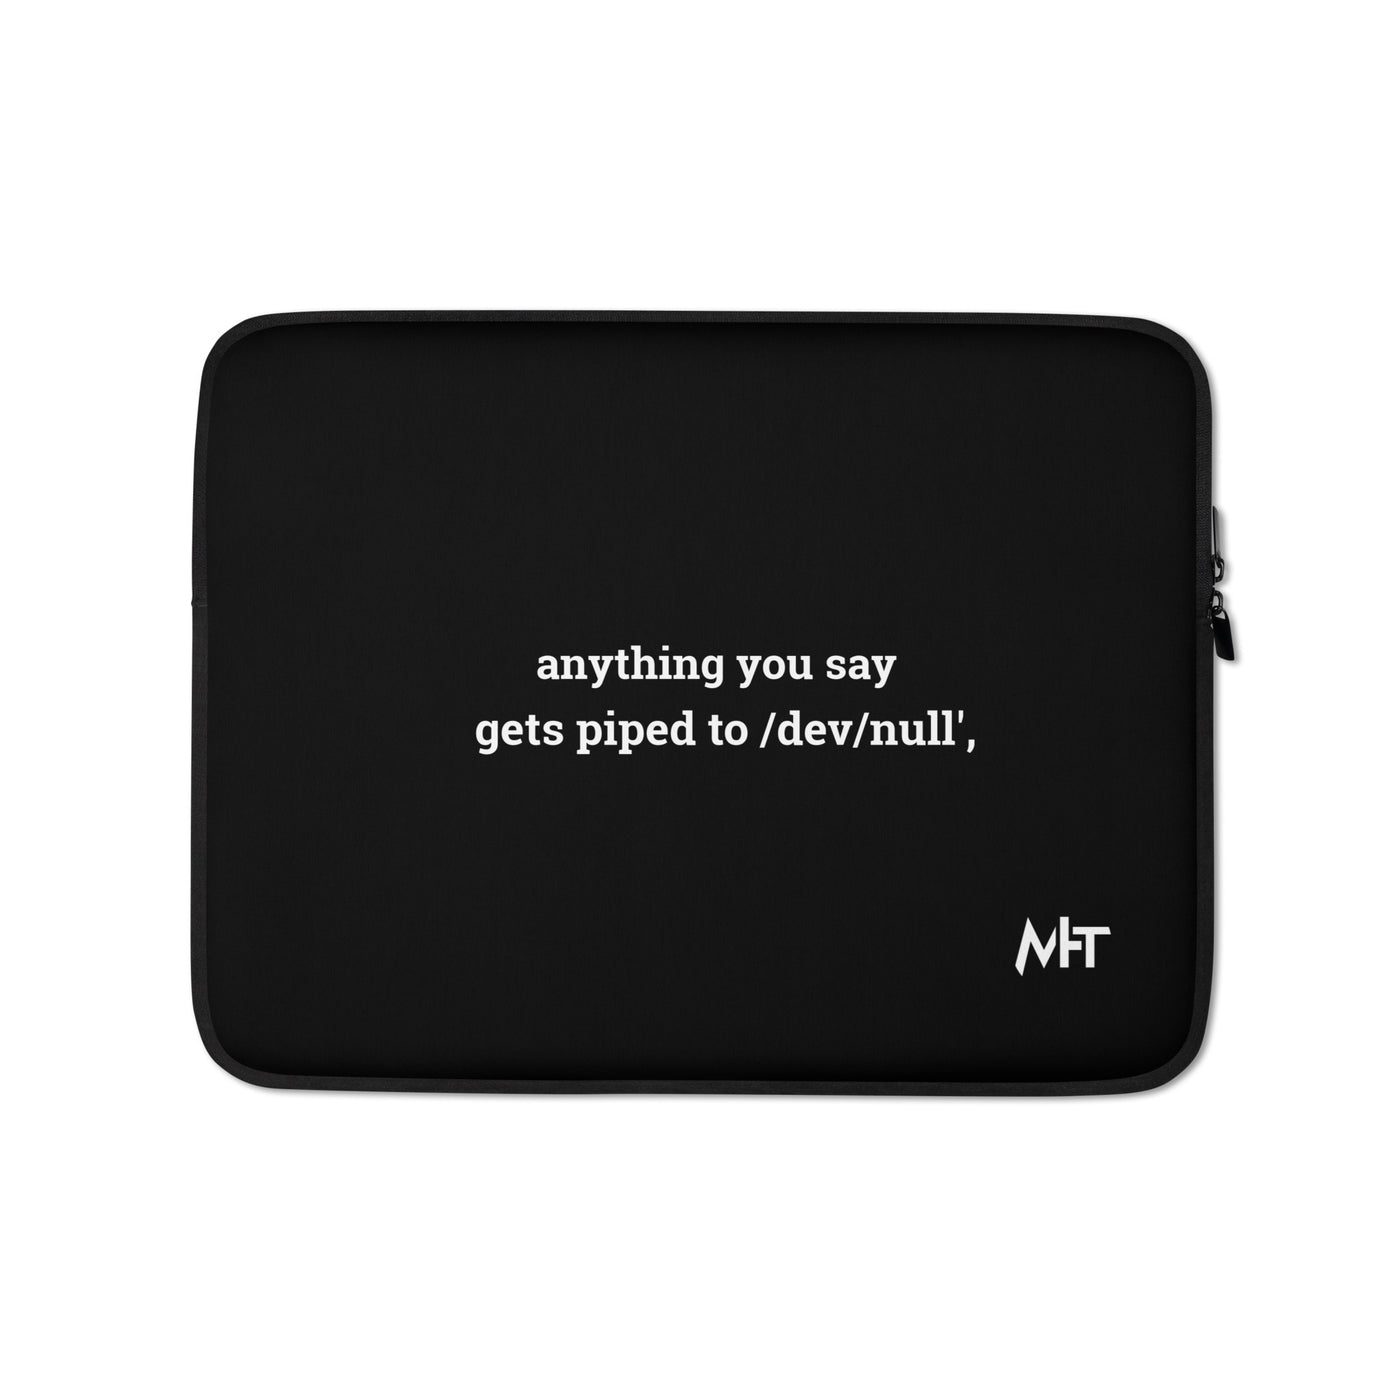 Anything you say Gets piped to devnull - Laptop Sleeve